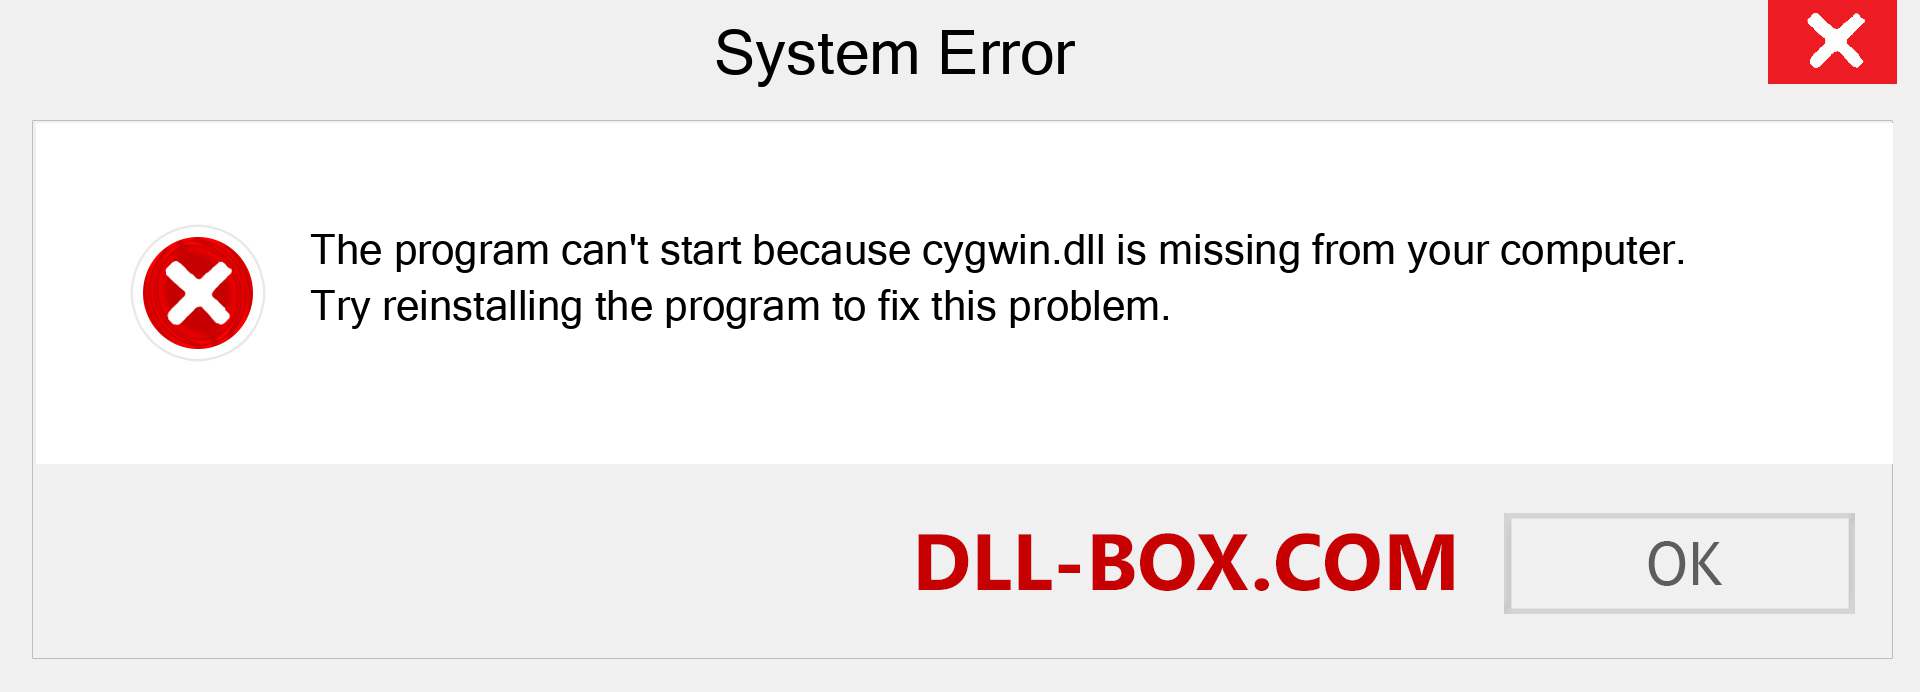  cygwin.dll file is missing?. Download for Windows 7, 8, 10 - Fix  cygwin dll Missing Error on Windows, photos, images